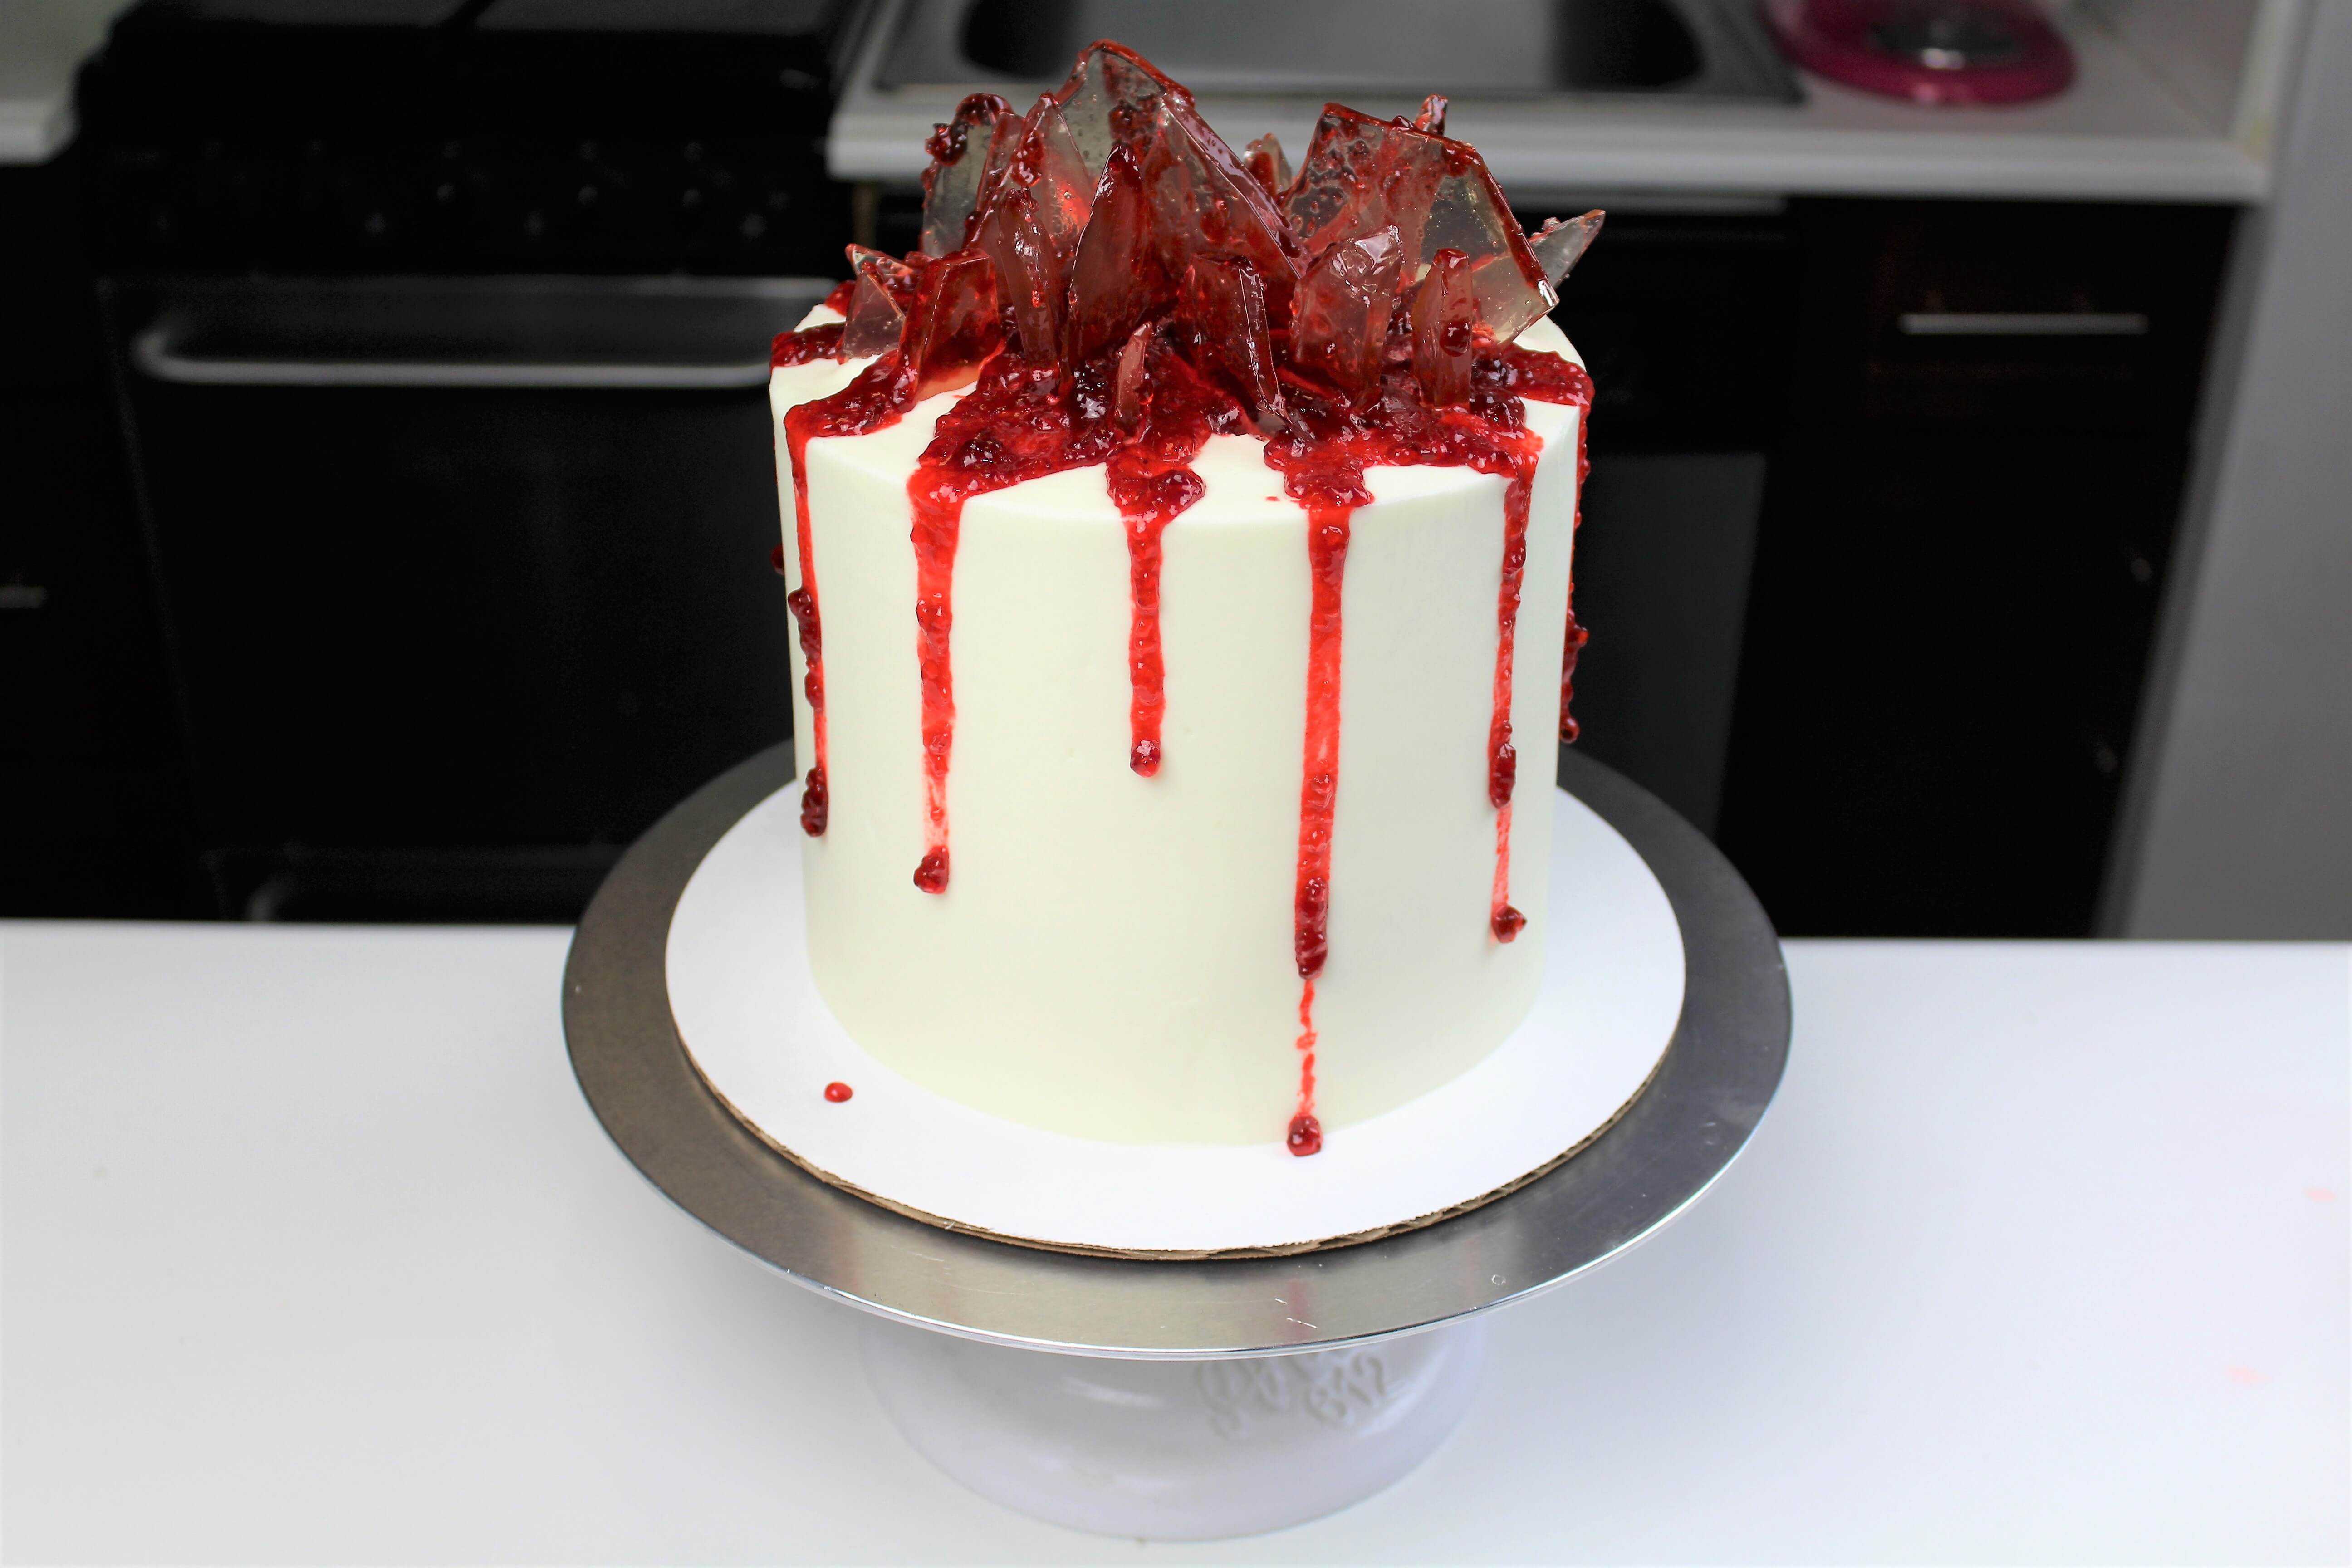 shattered-glass-cake-made-with-edible-sugar-shards-and-jam-blood